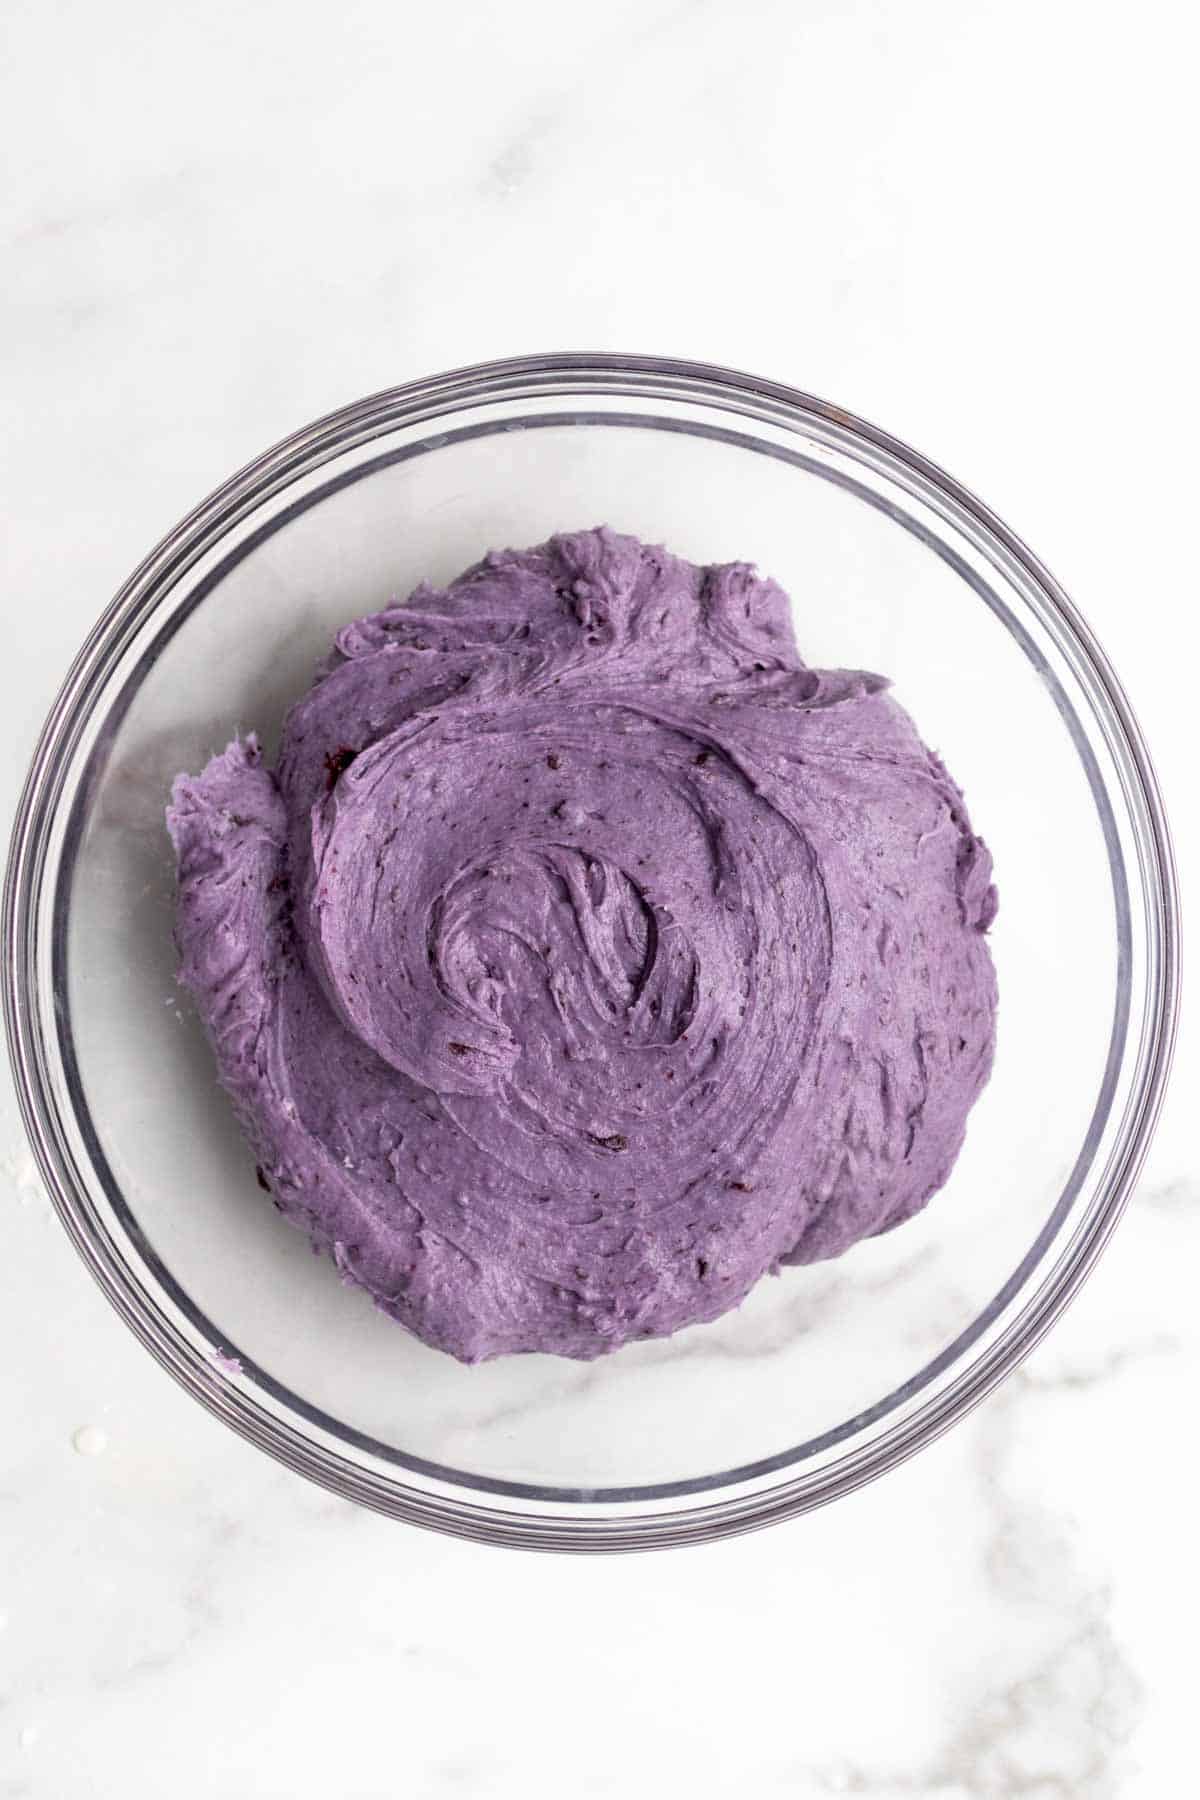 Mixing the wet and dry ingredients into a purple cookie dough.